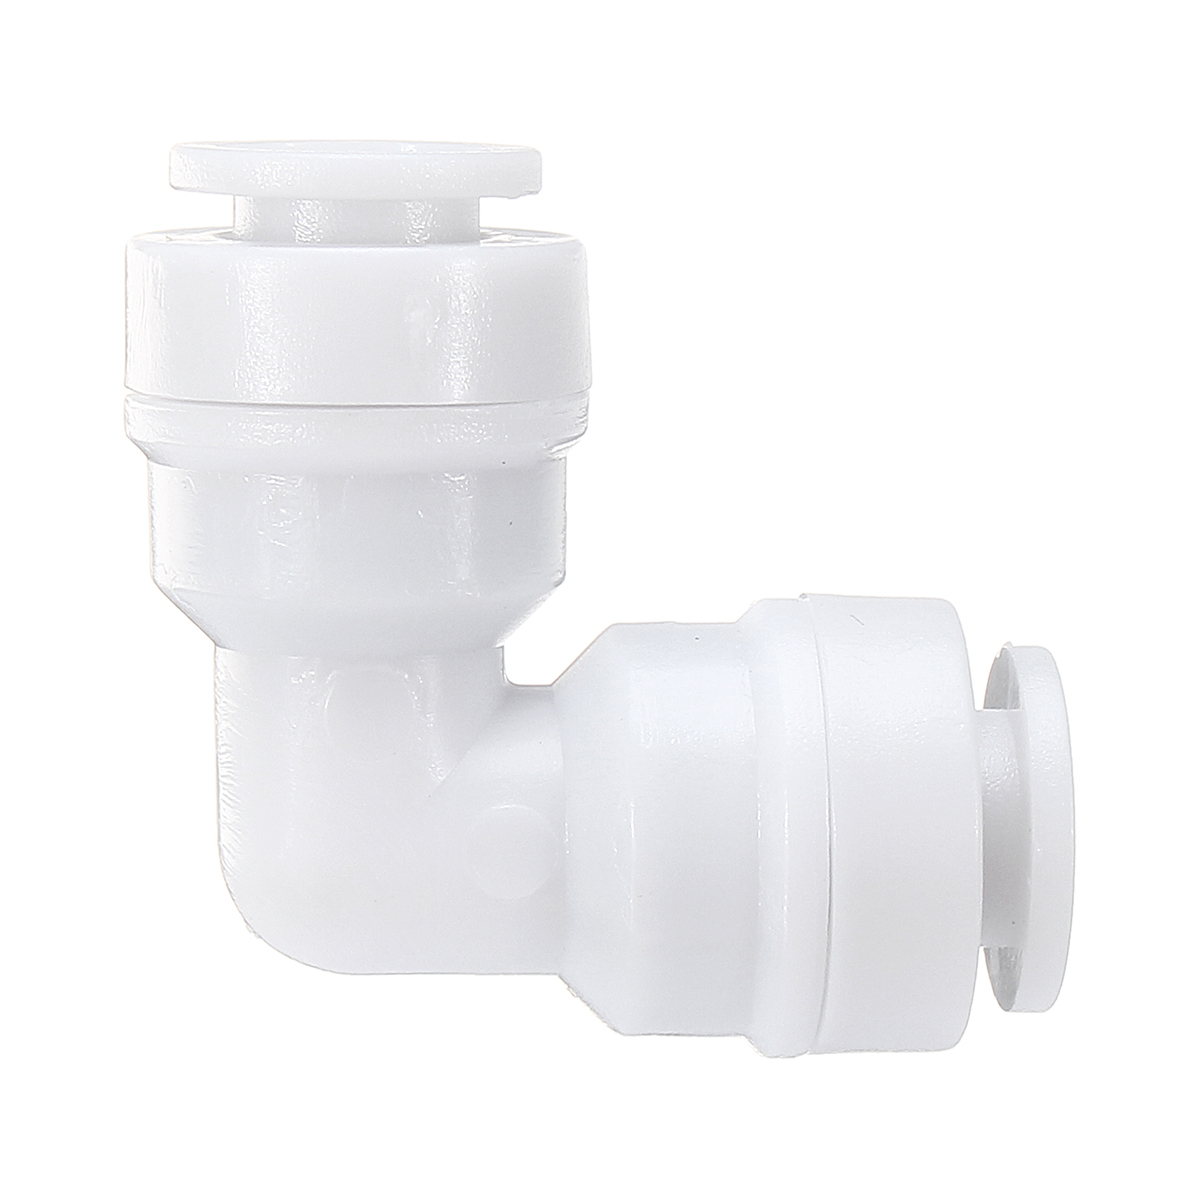 14-Inch-RO-Grade-L-Type-Water-Tube-Quick-Connect-Parts-Fittings-Connection-Pipes-for-Water-Filters-1378011